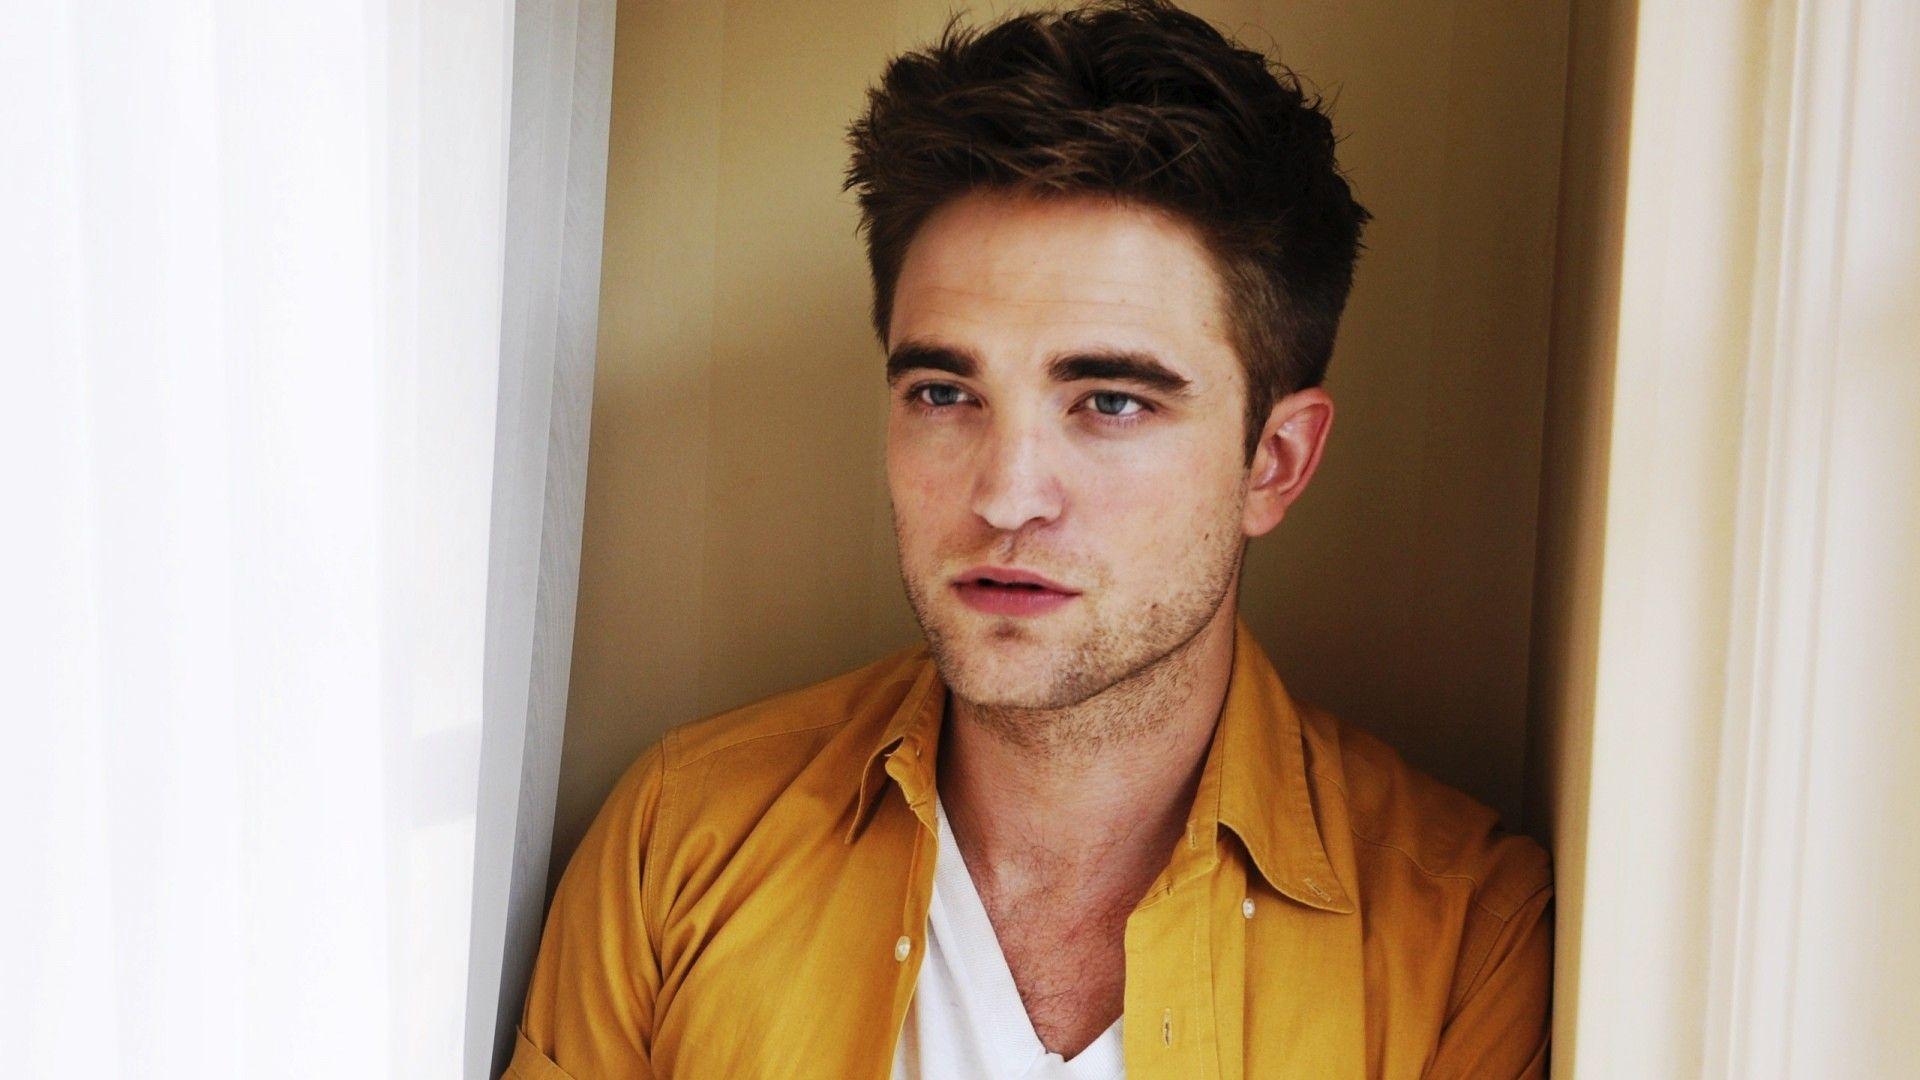 Most Famous HD Wallpaper of Robert Pattinson Hollywood Actor